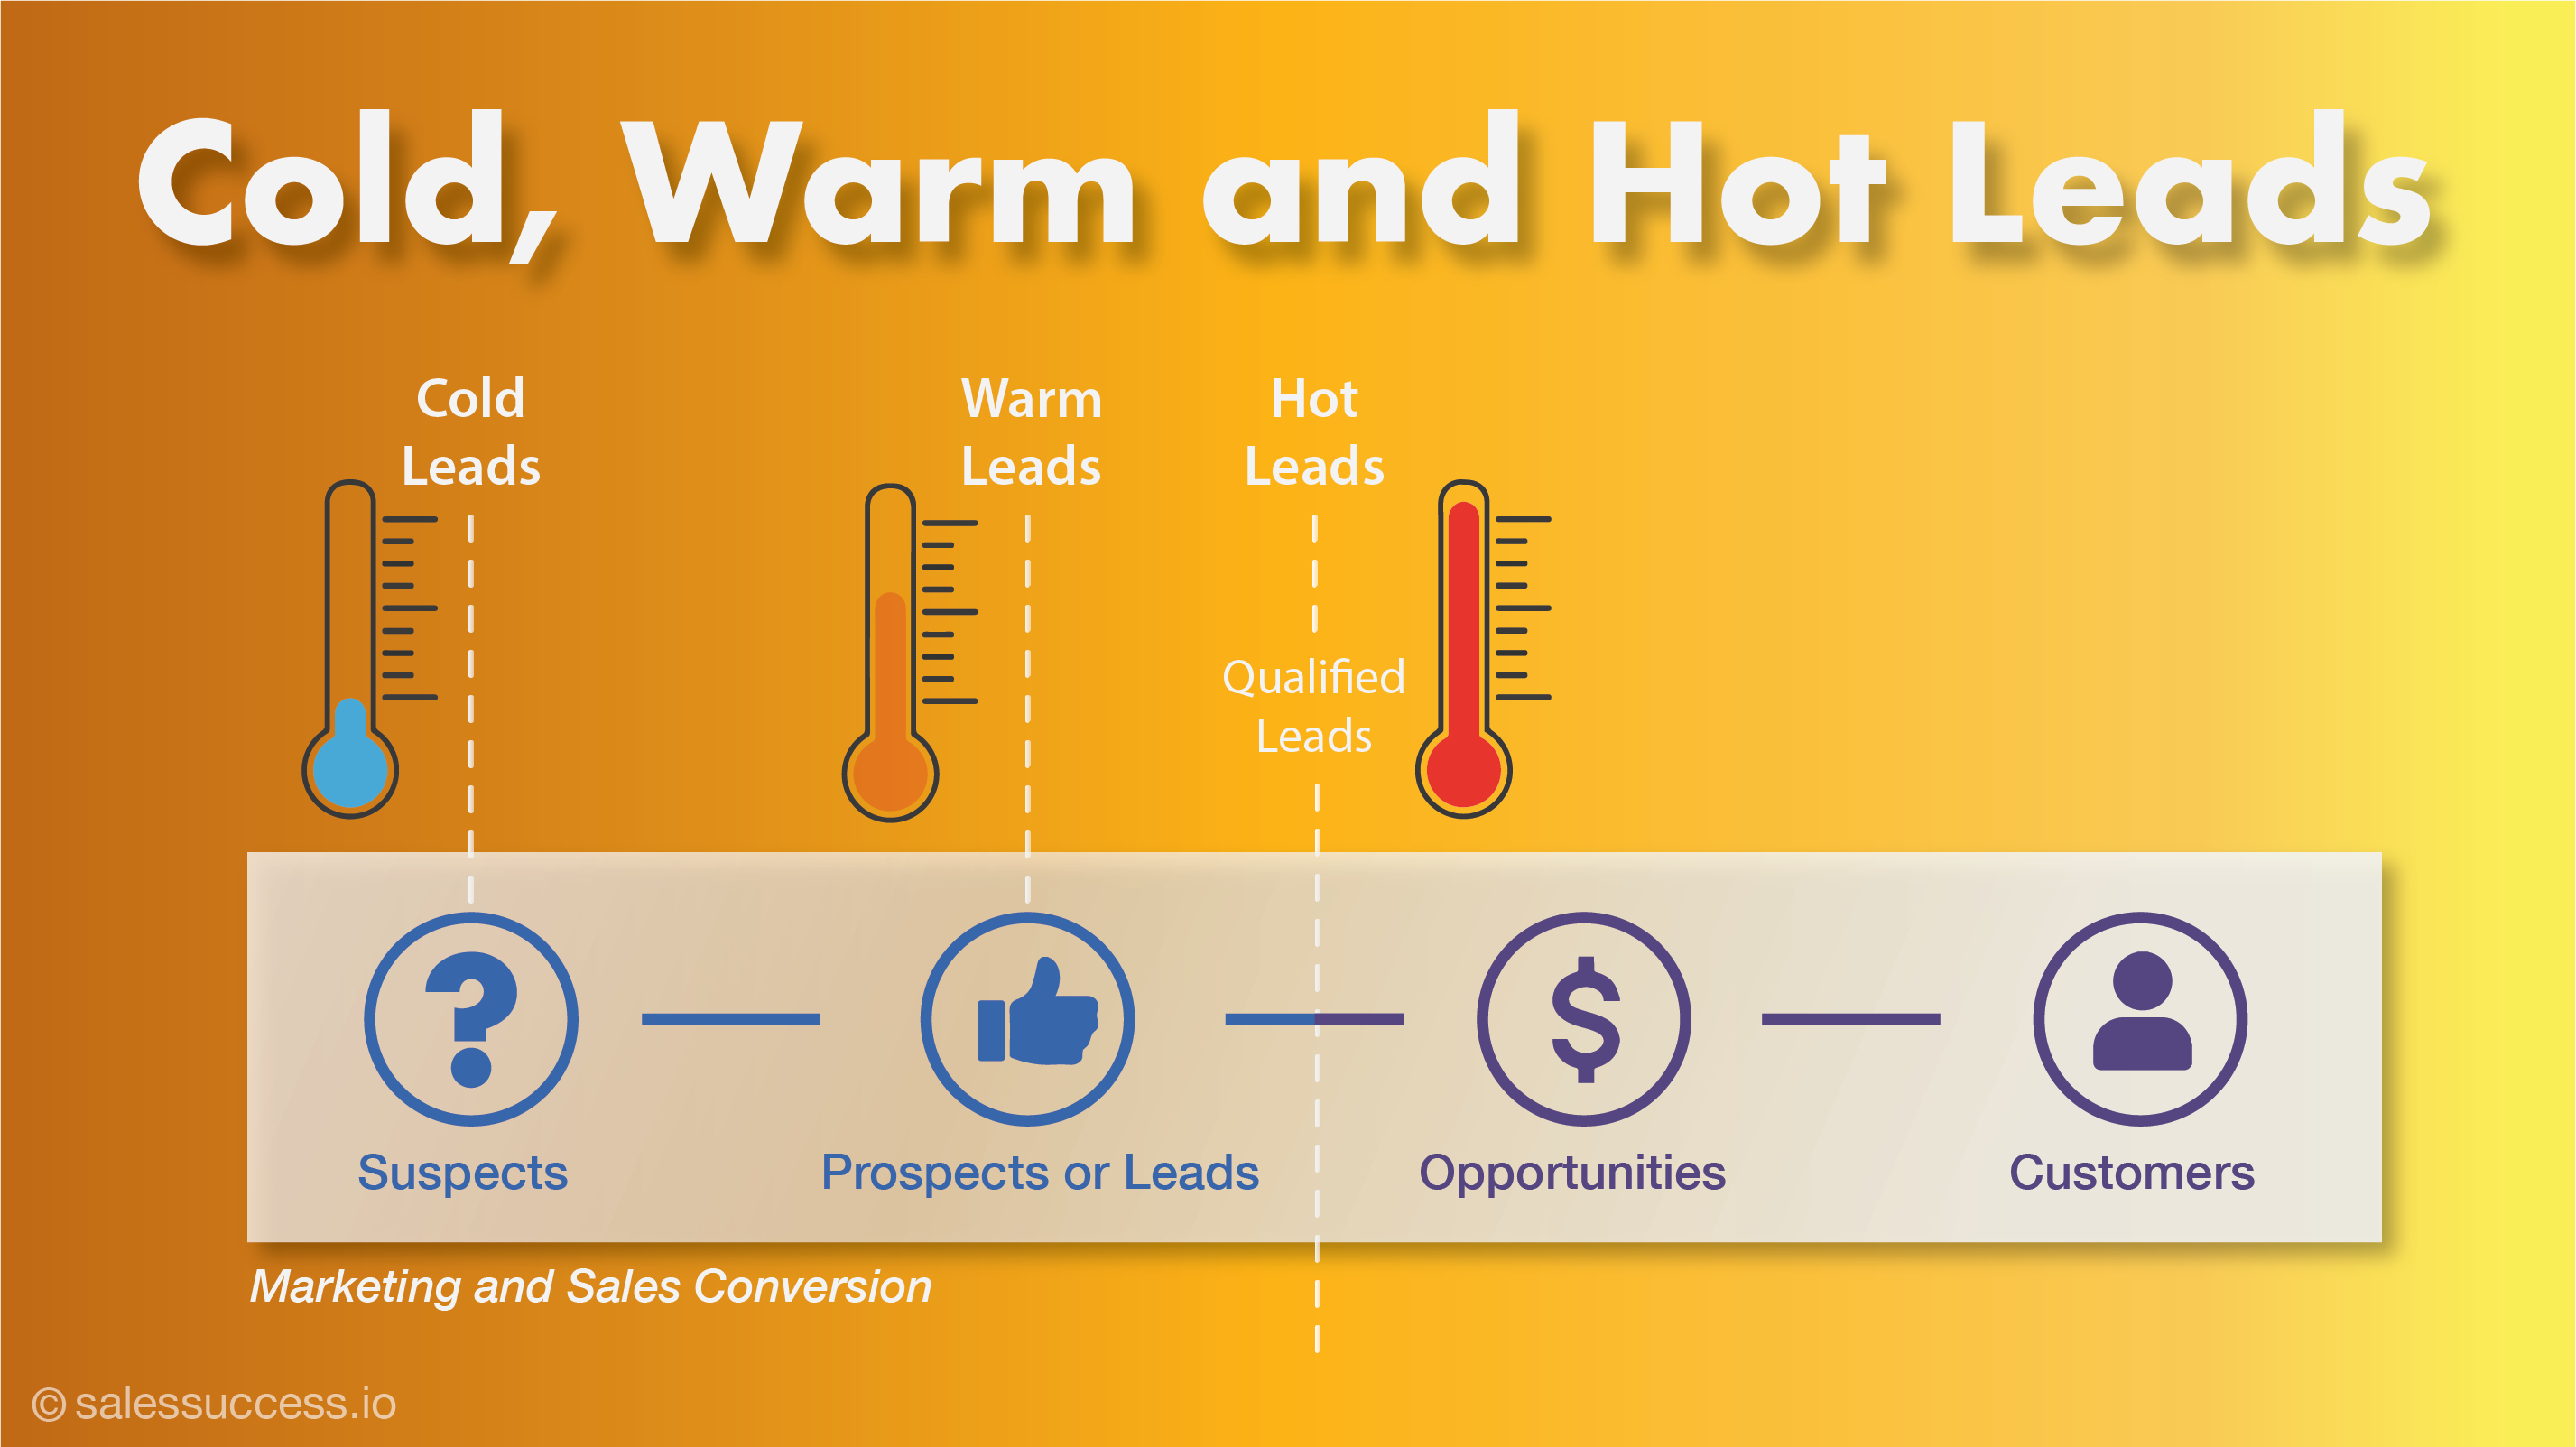 Cold, Warm, and Hot Leads